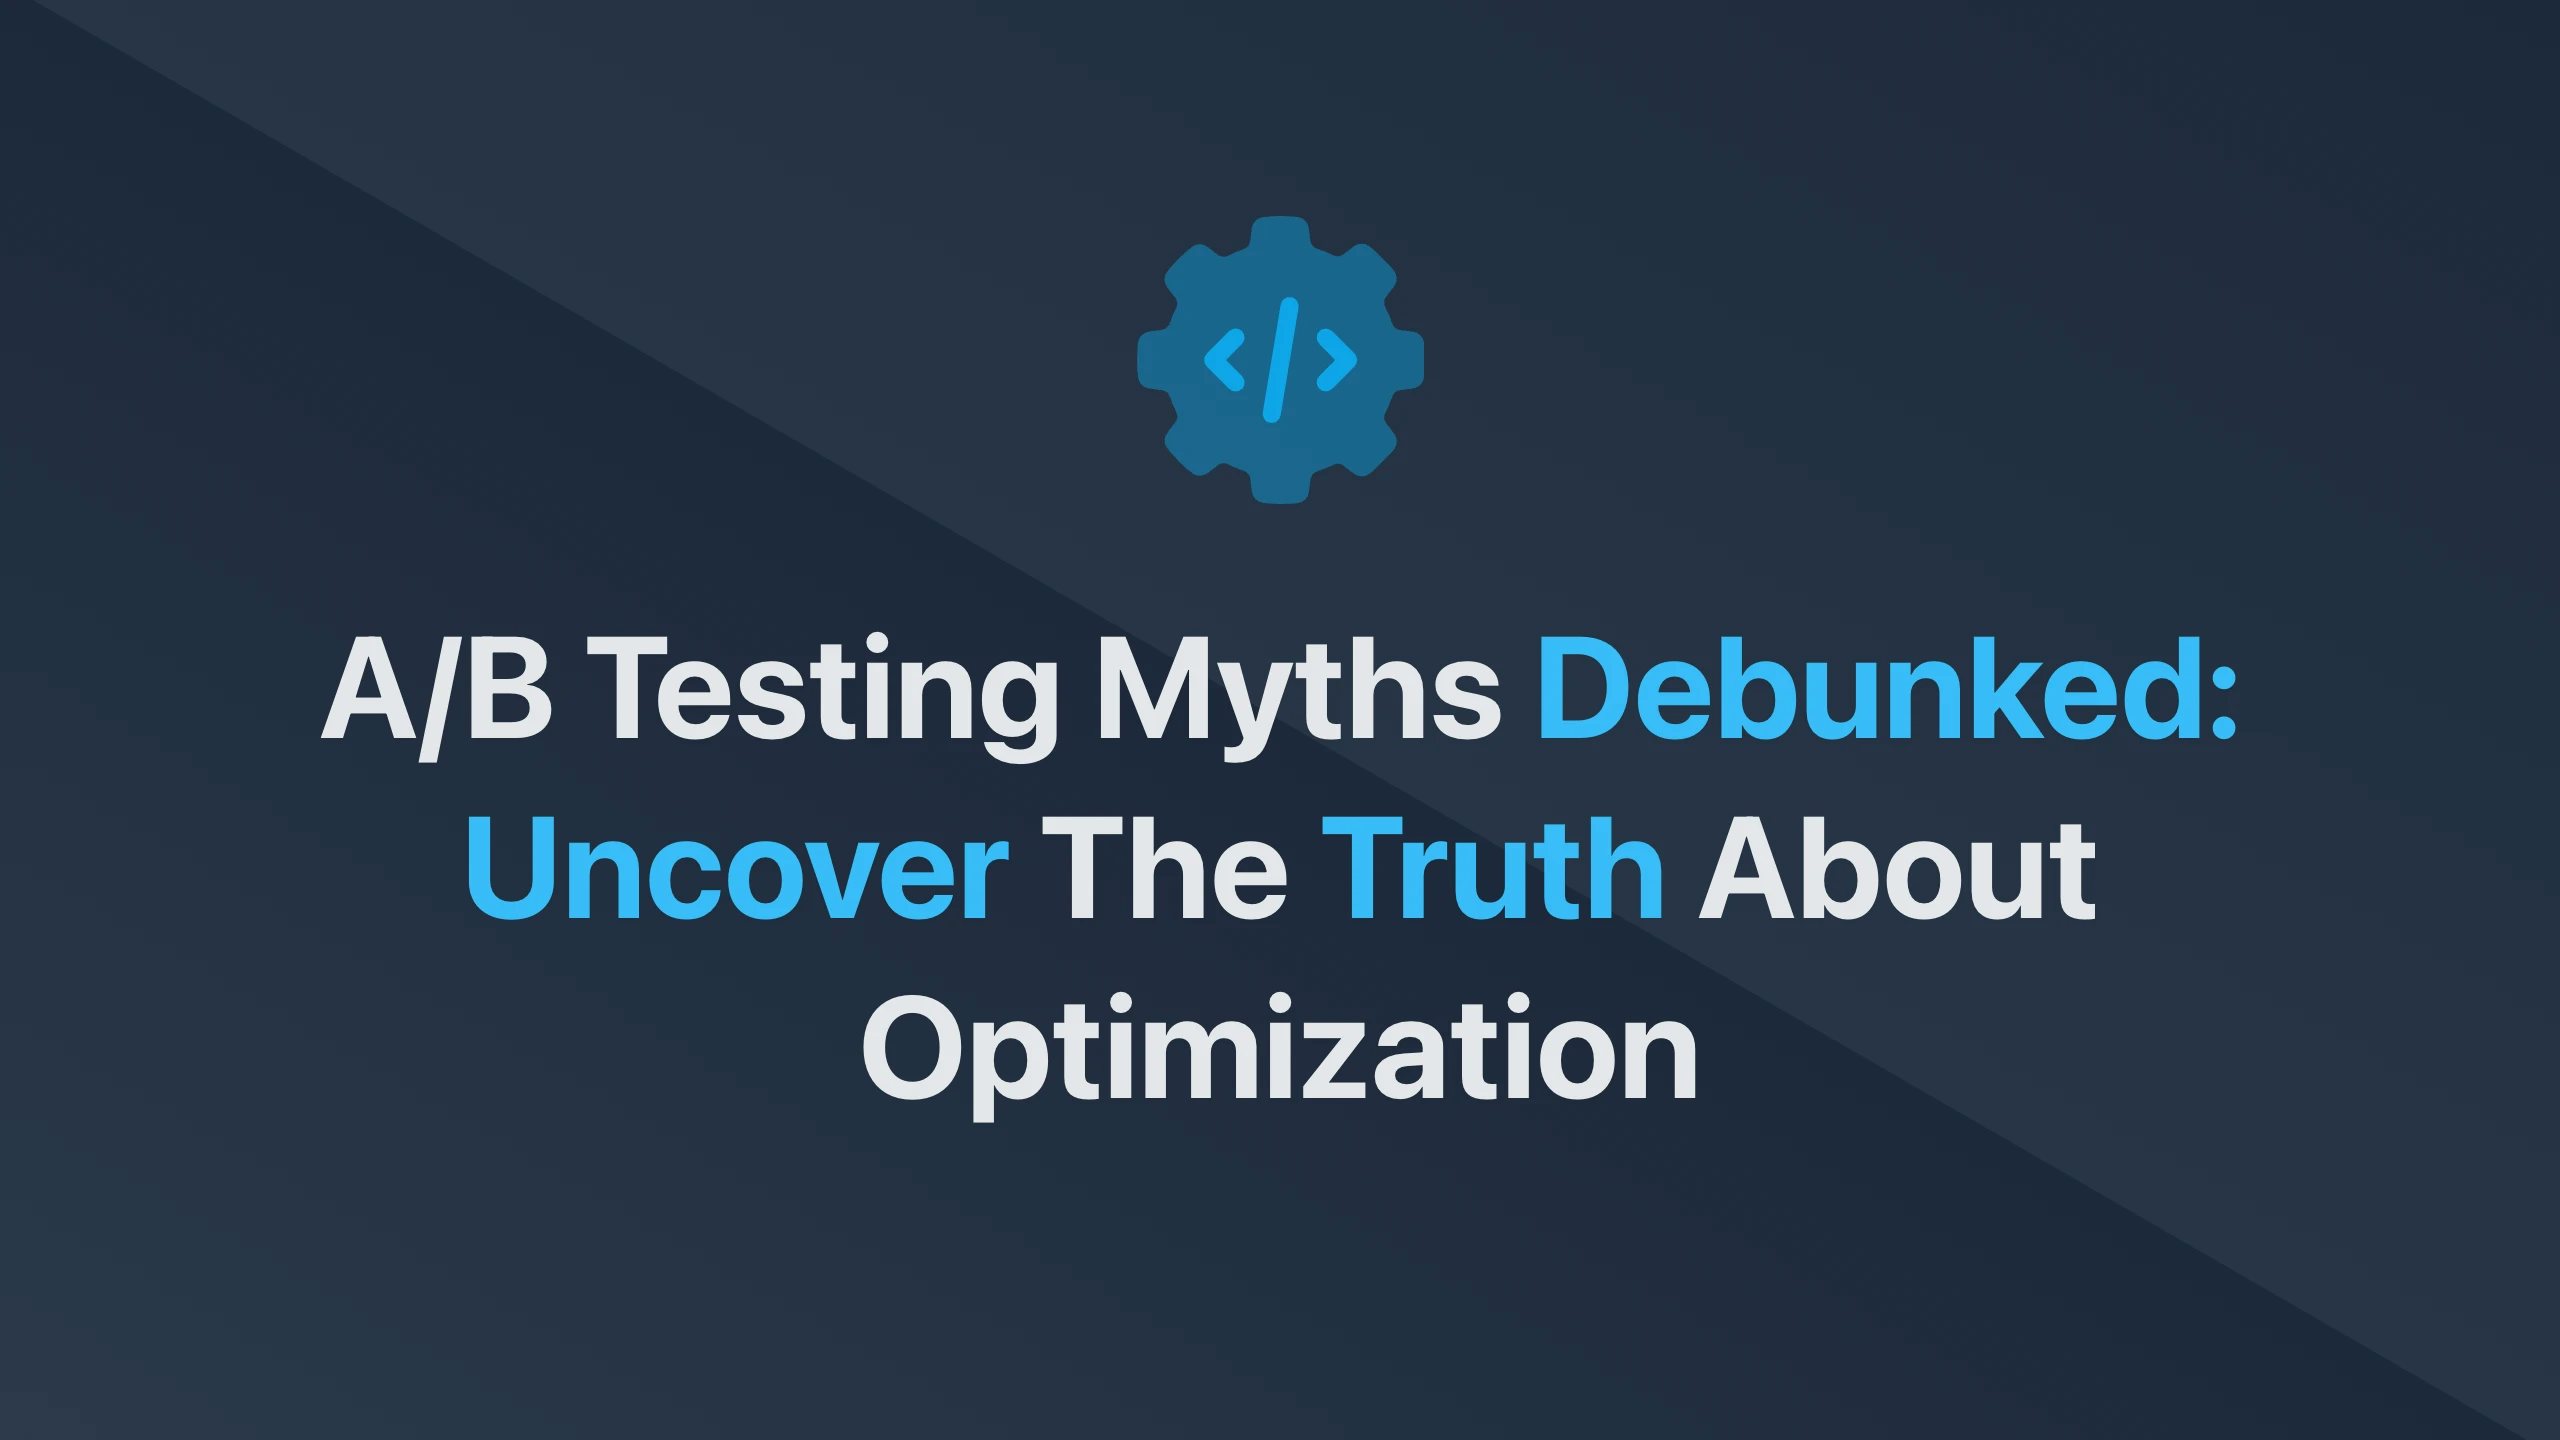 Cover Image for A/B Testing Myths Debunked: Uncover the Truth About Optimization